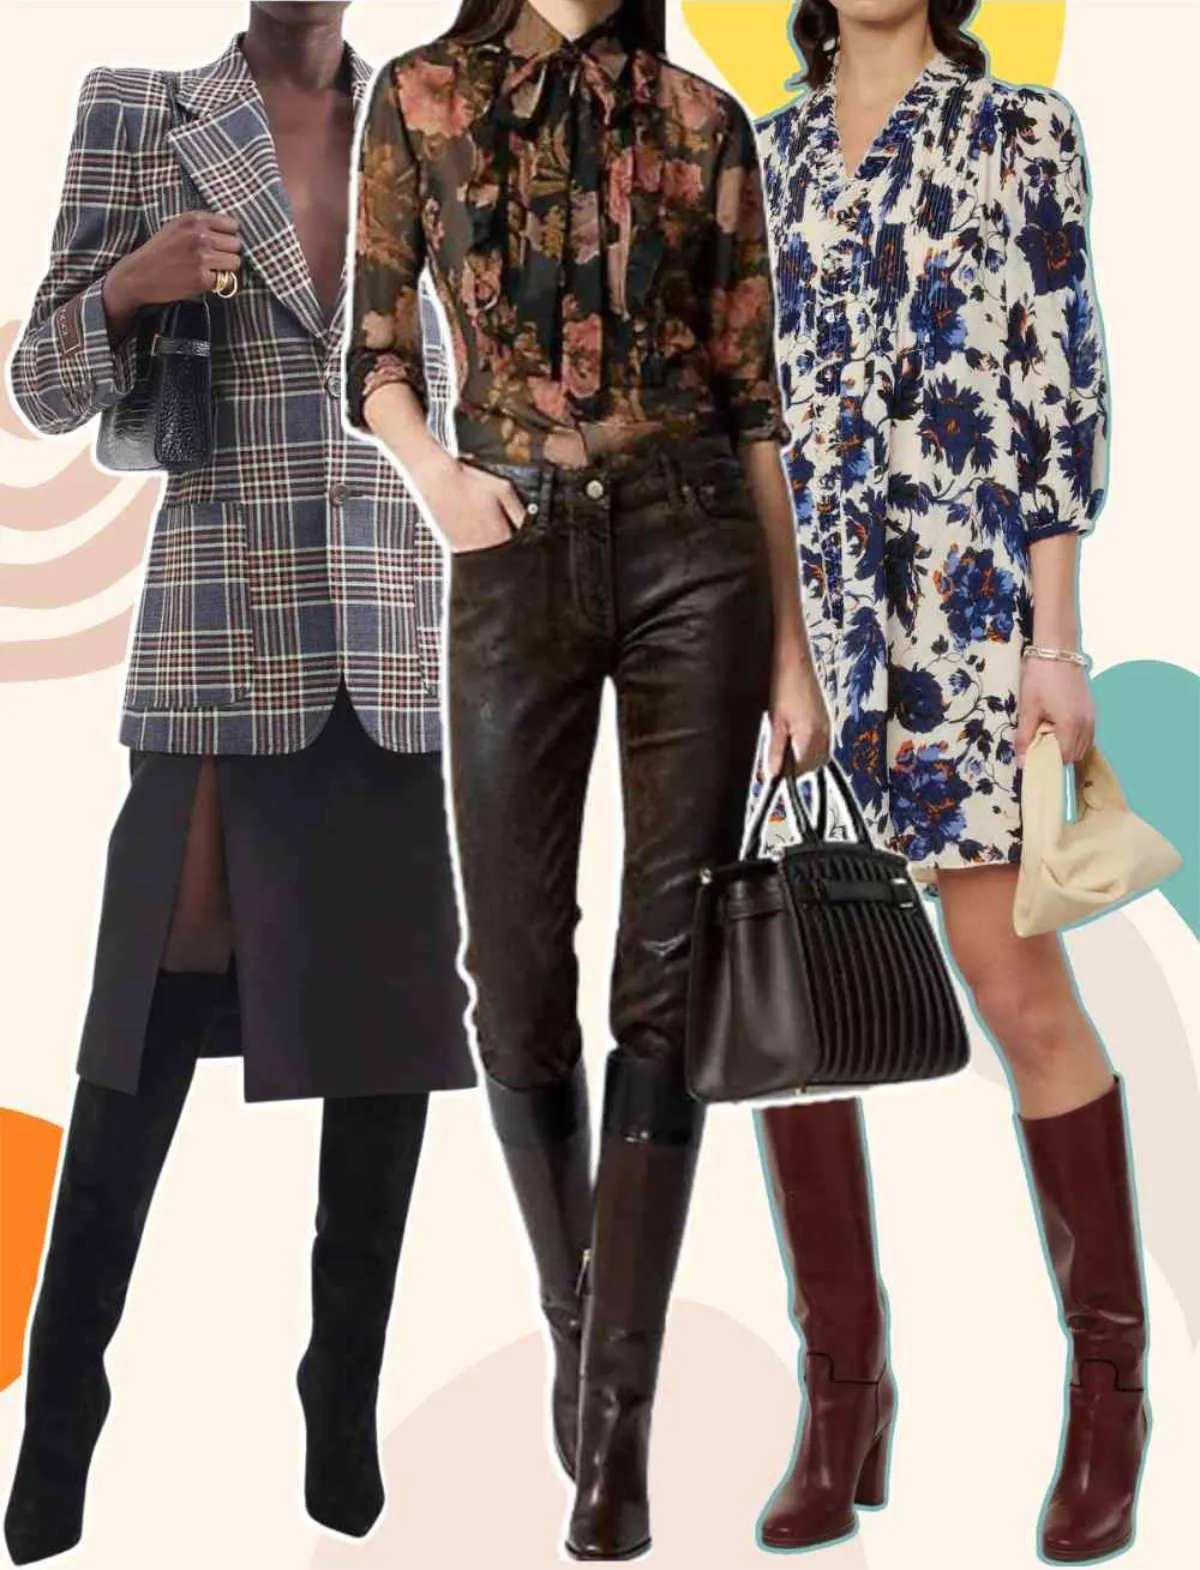 Collage of 3 women wearing different knee high boot outfits over patterned background.